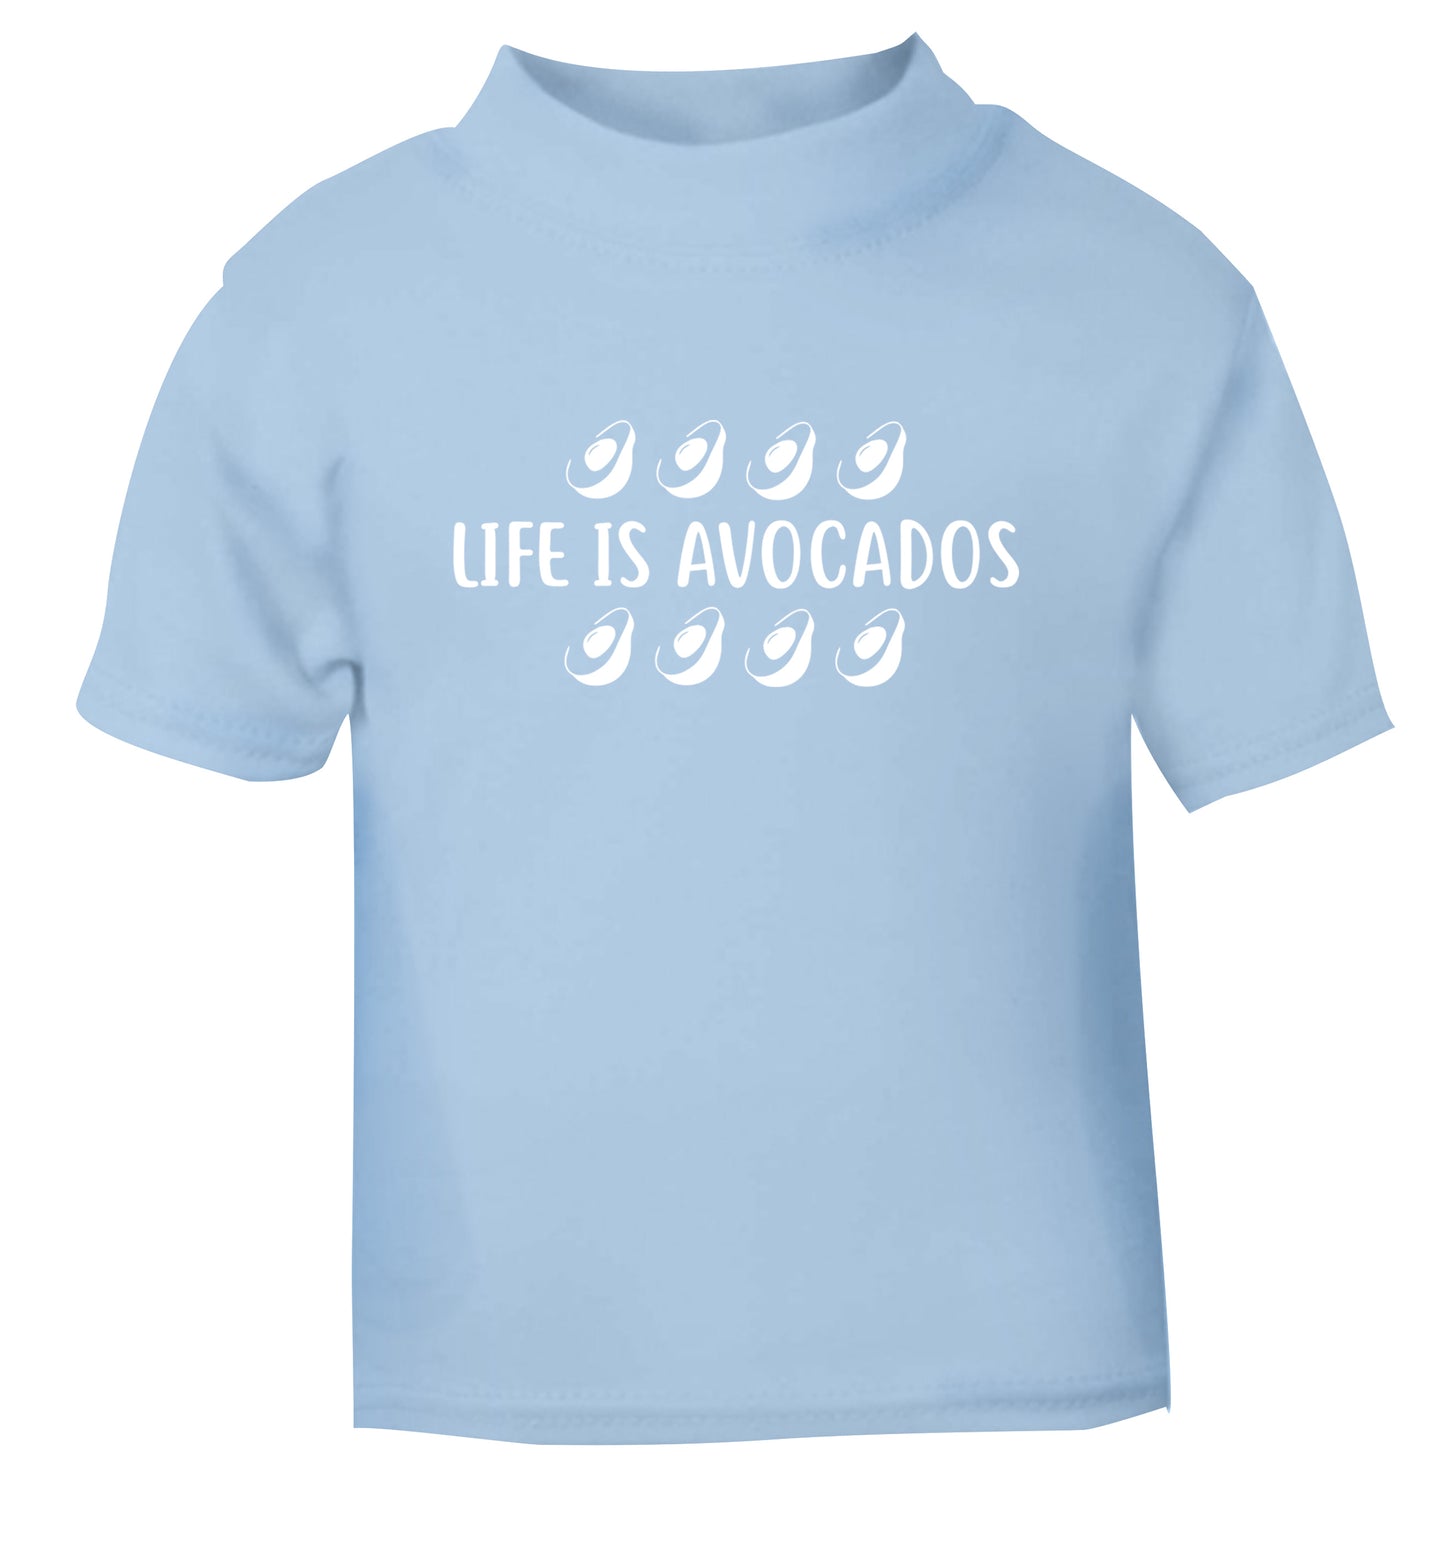 Life is avocados light blue Baby Toddler Tshirt 2 Years